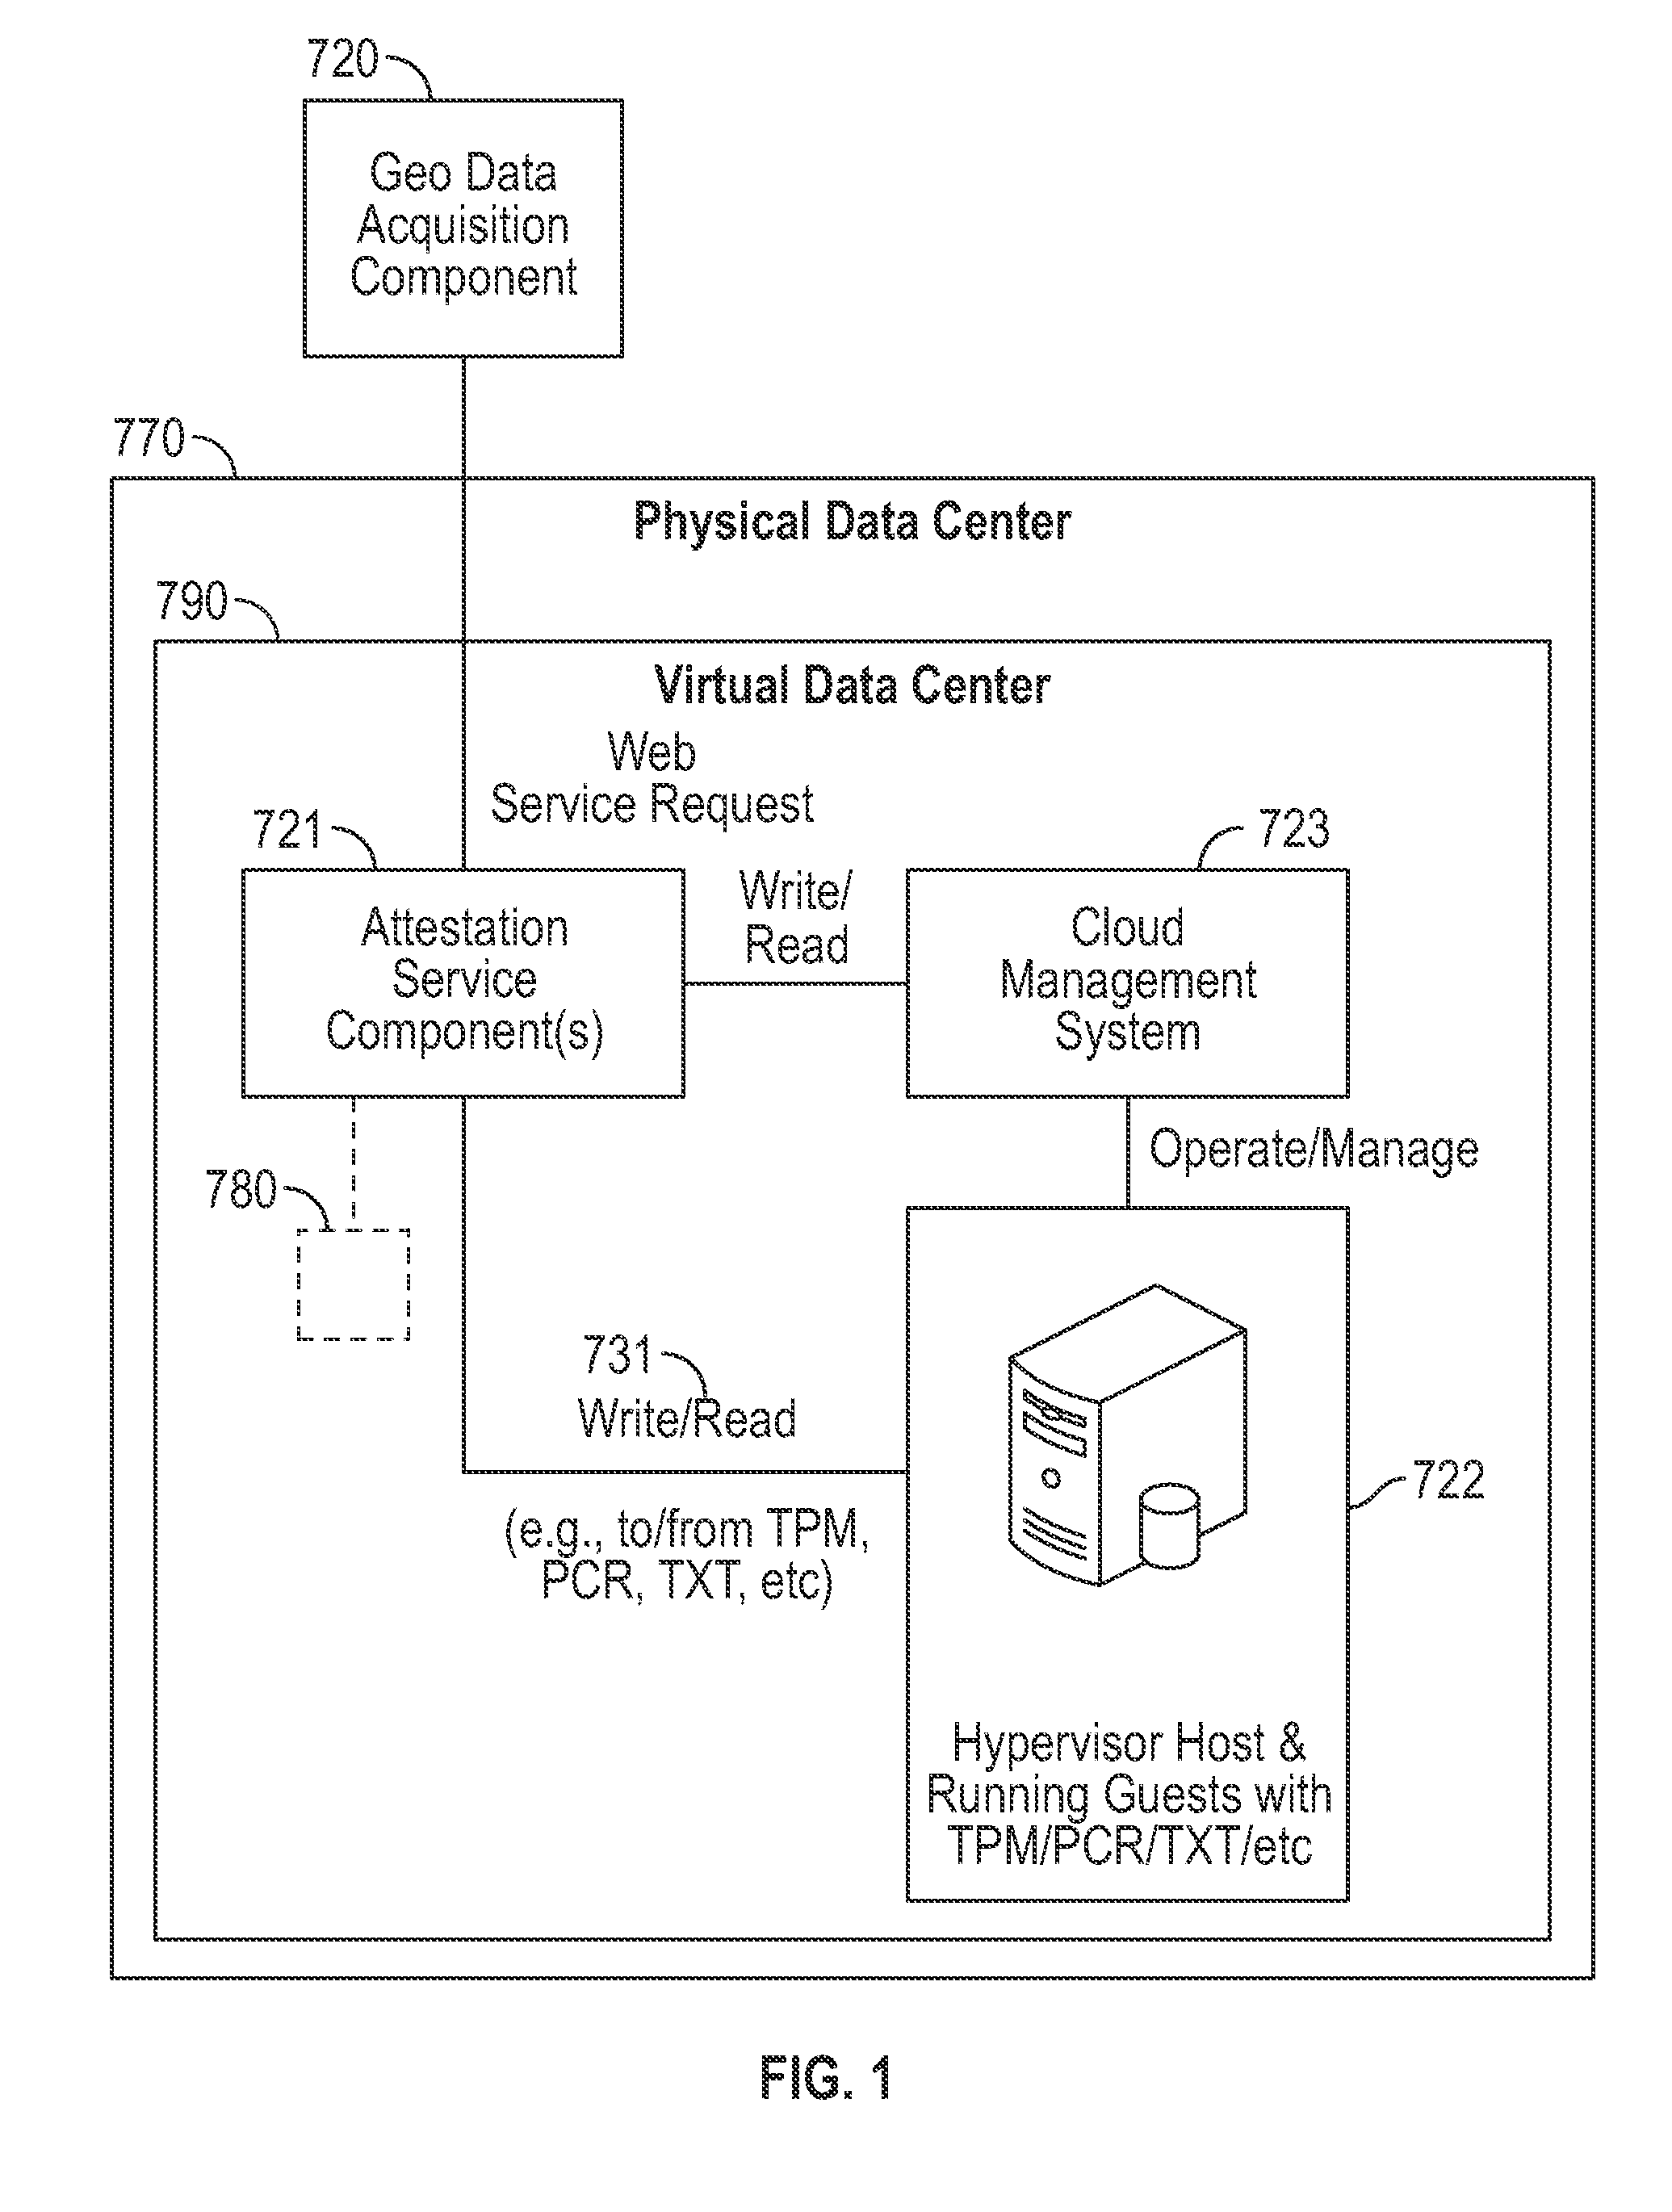 Systems and methods for securely provisioning the geographic location of physical infrastructure elements in cloud computing environments